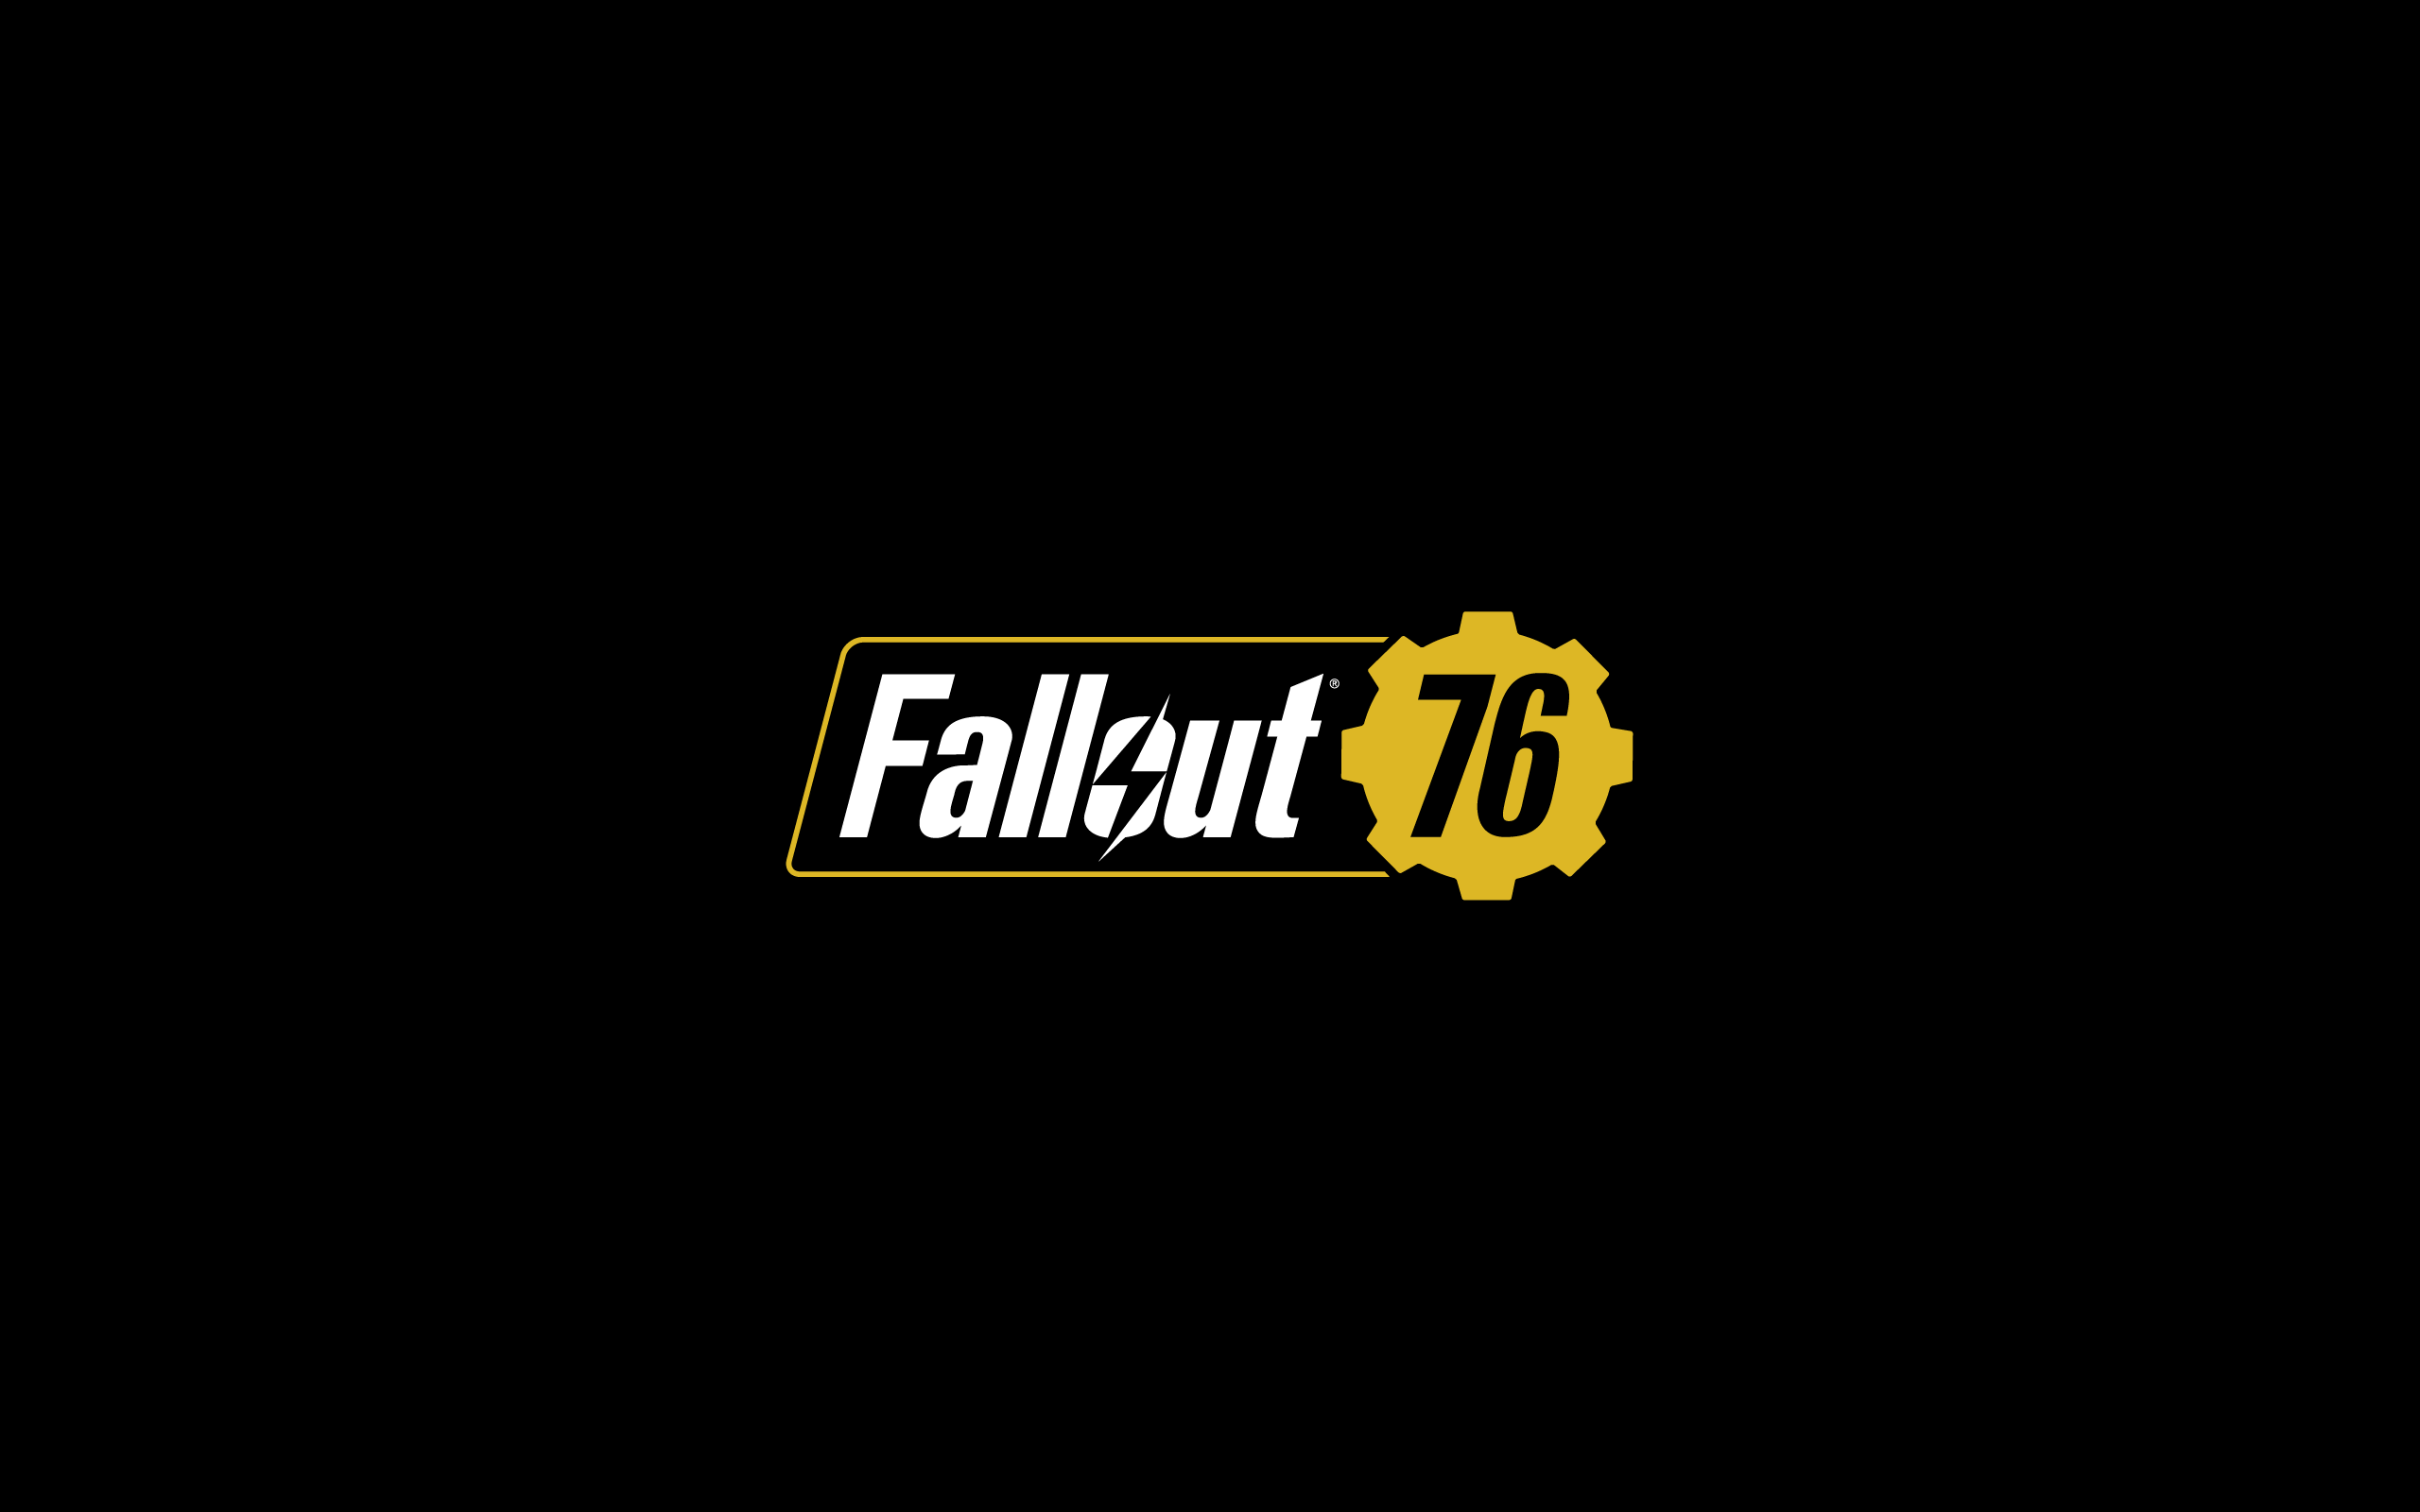 General 2560x1600 Fallout 76 Fallout Bethesda Softworks video games